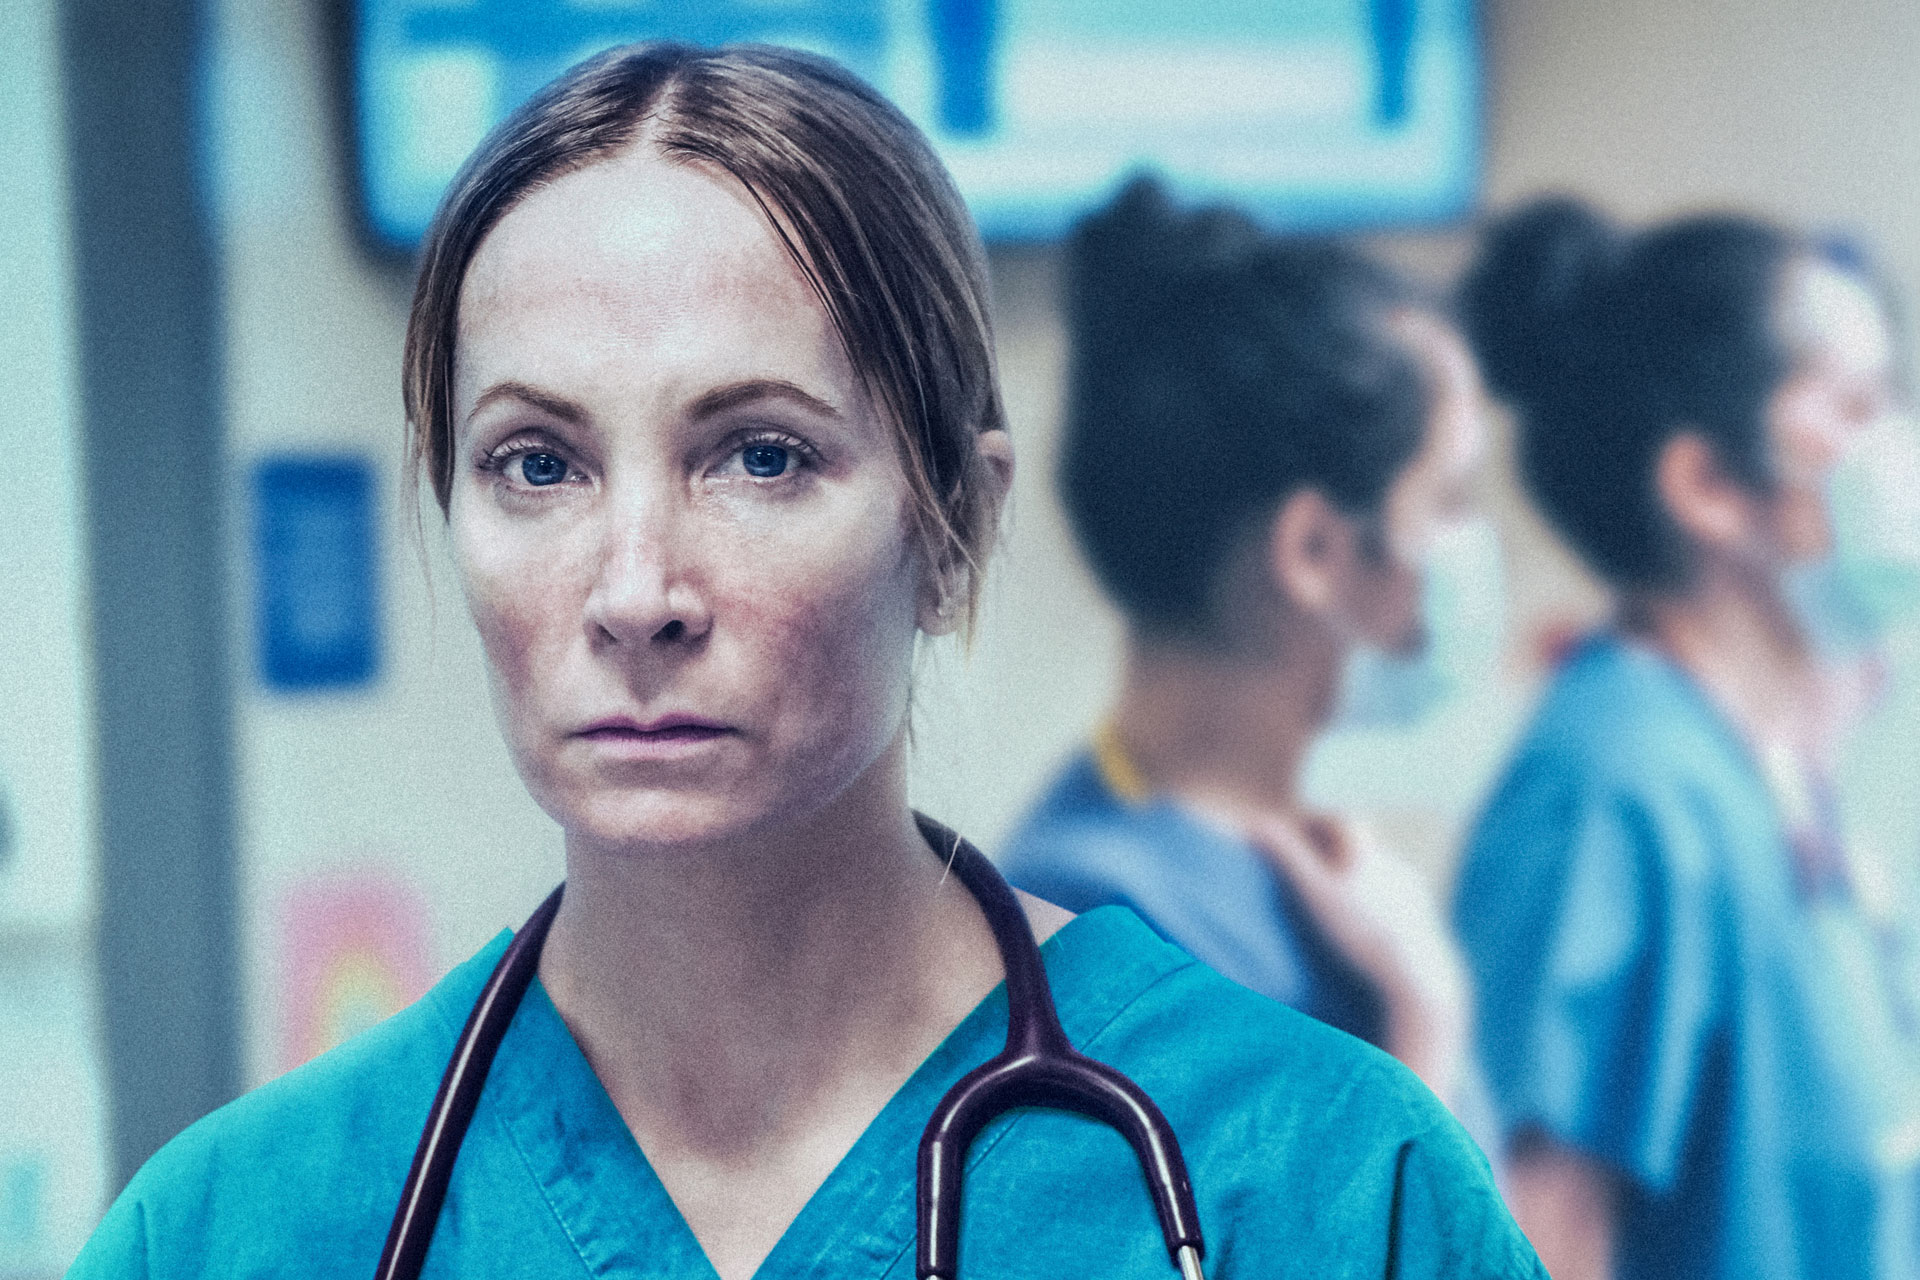 Breathtaking: ITV’s New Covid Drama Is A Must-Watch